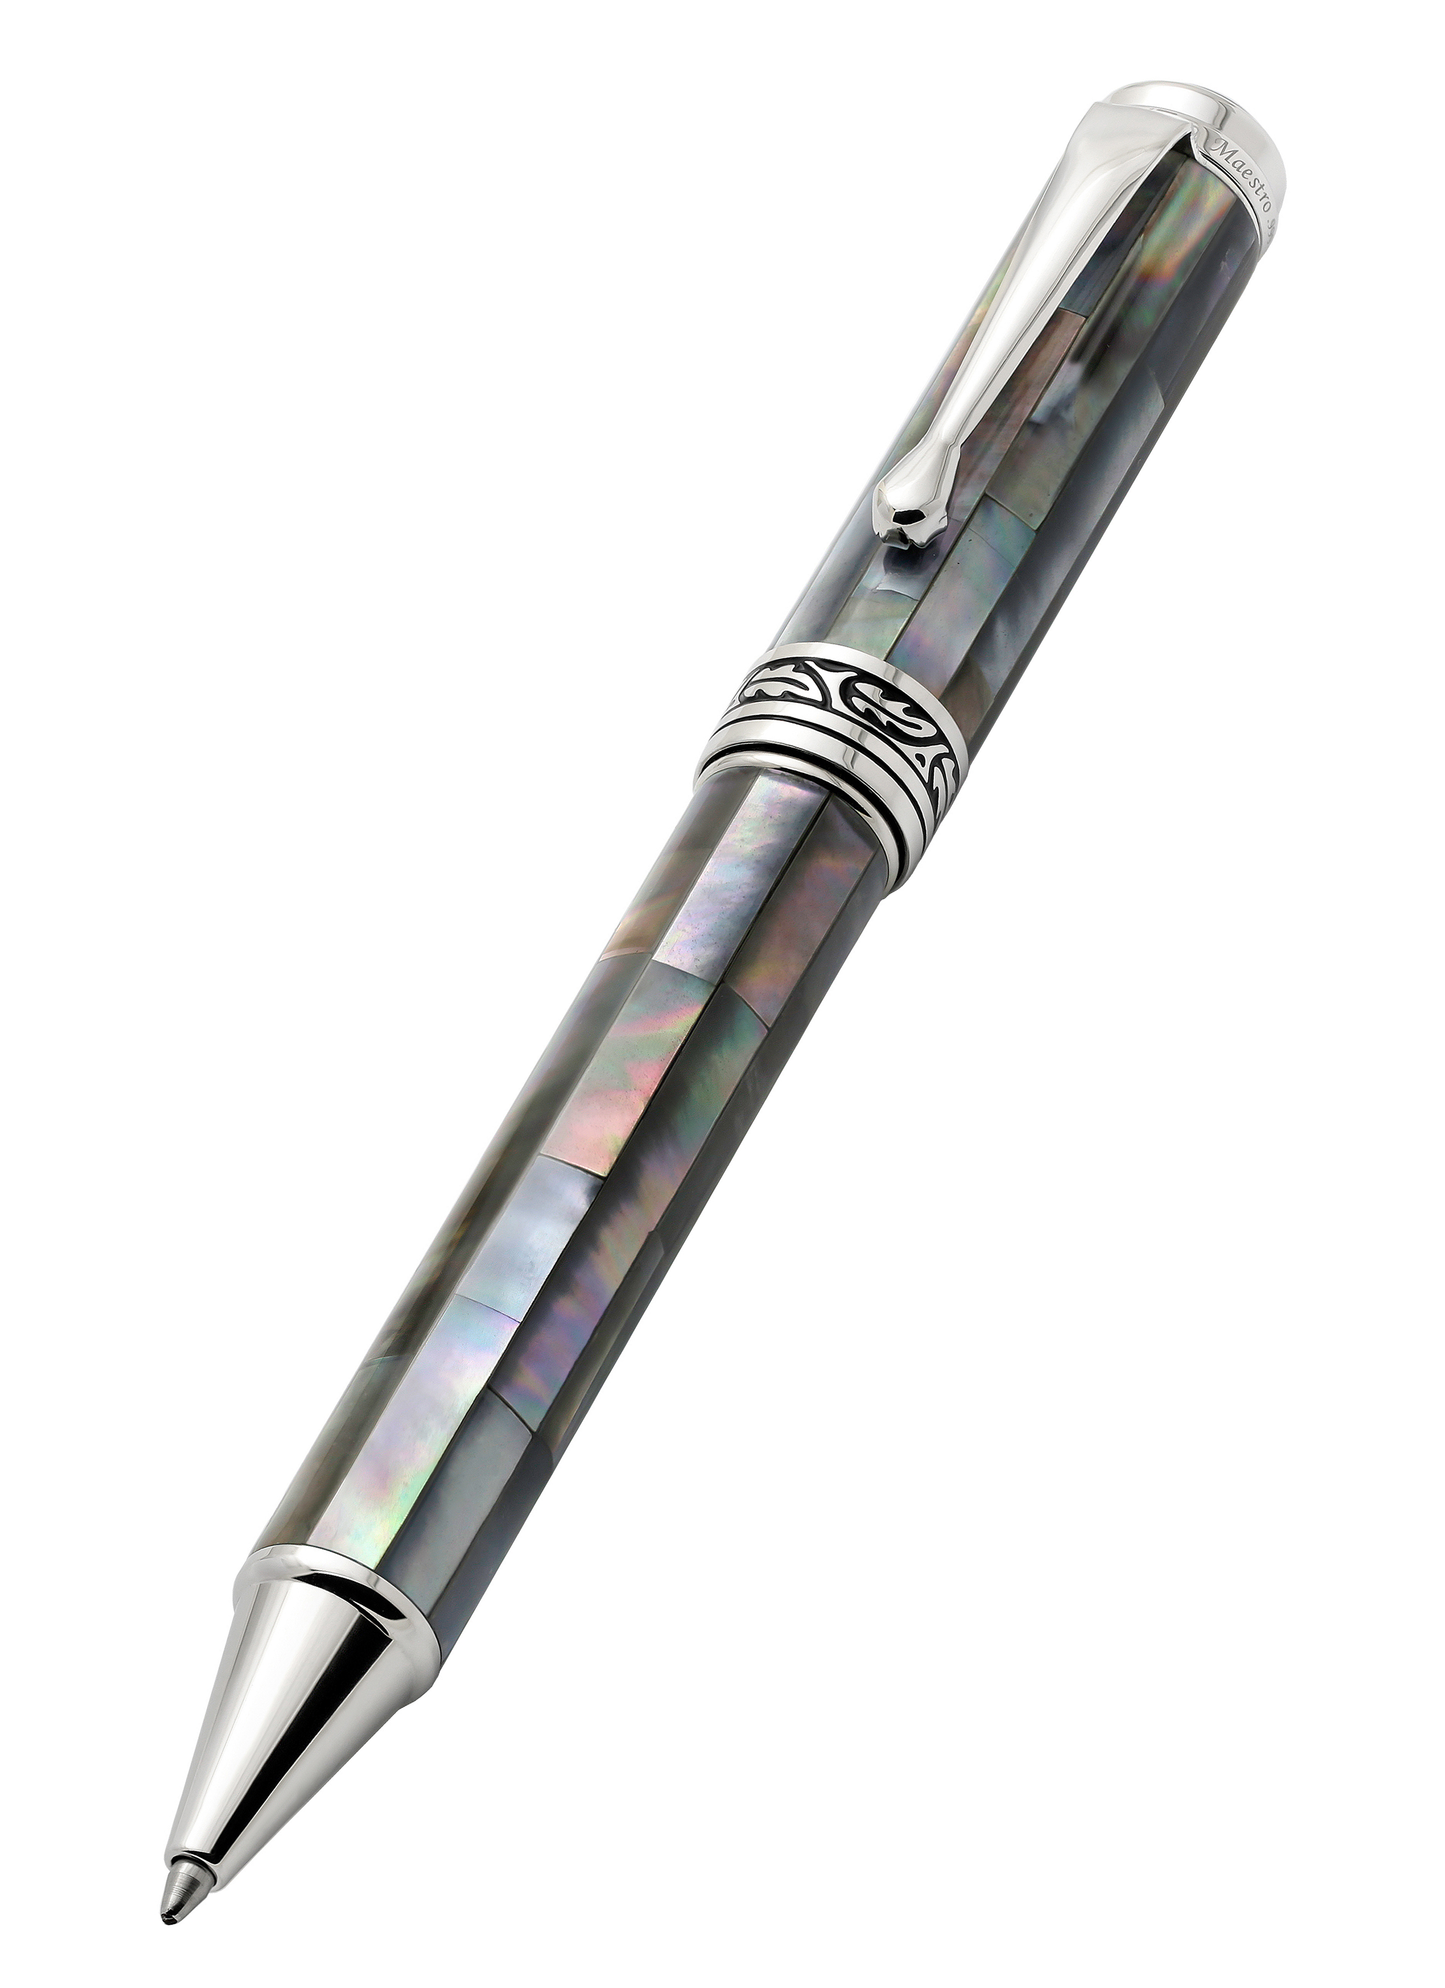 Xezo - Angled 3D view of the Maestro Black Mother of Pearl B ballpoint pen